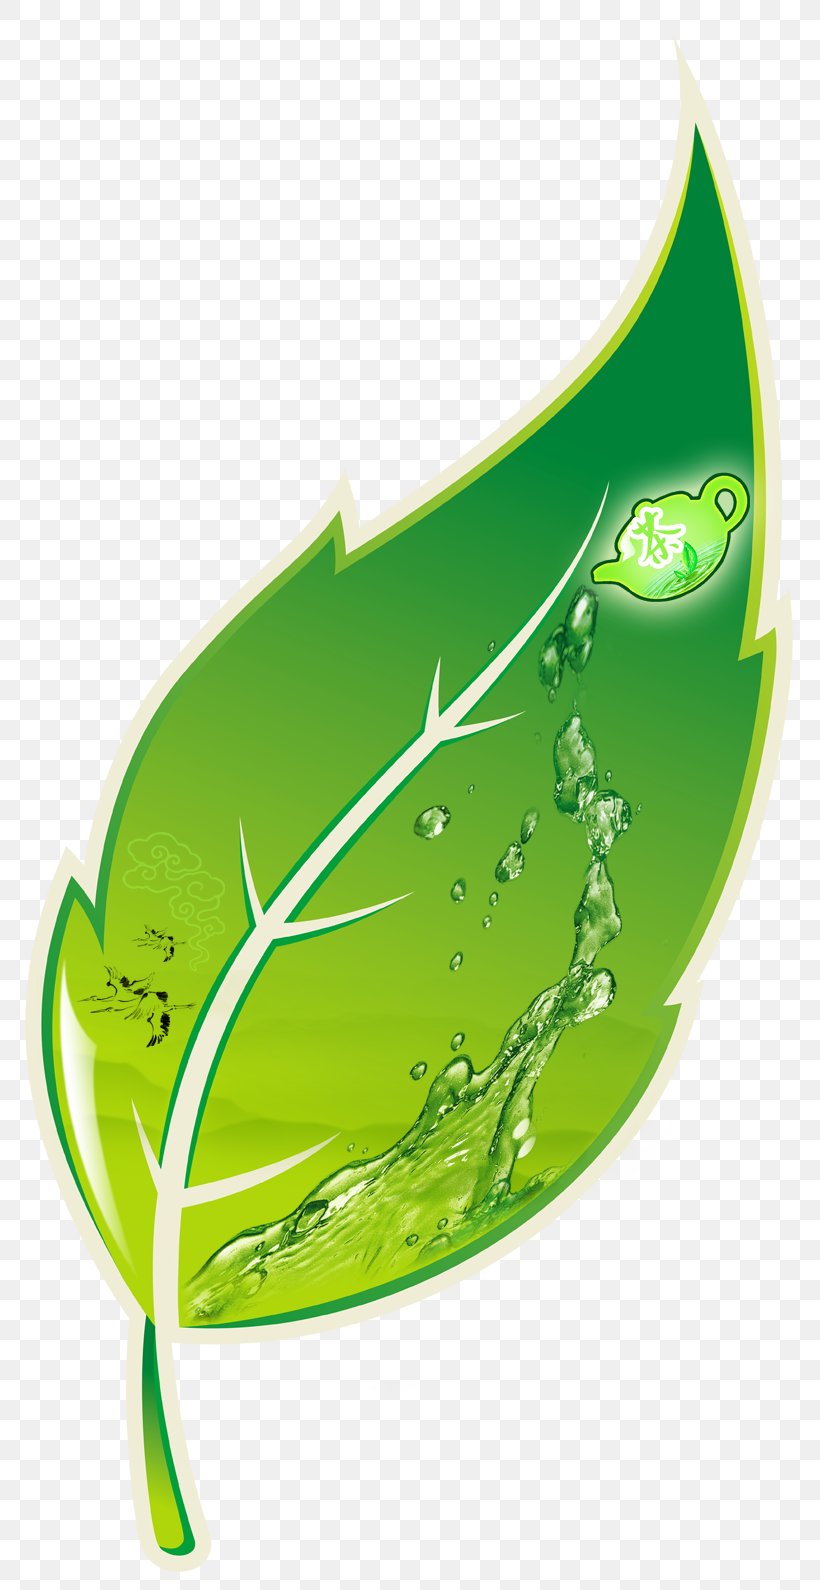 Green Tea Anxi County Graphic Design, PNG, 781x1590px, Tea, Anxi County, Camellia Sinensis, Cartoon, Flora Download Free